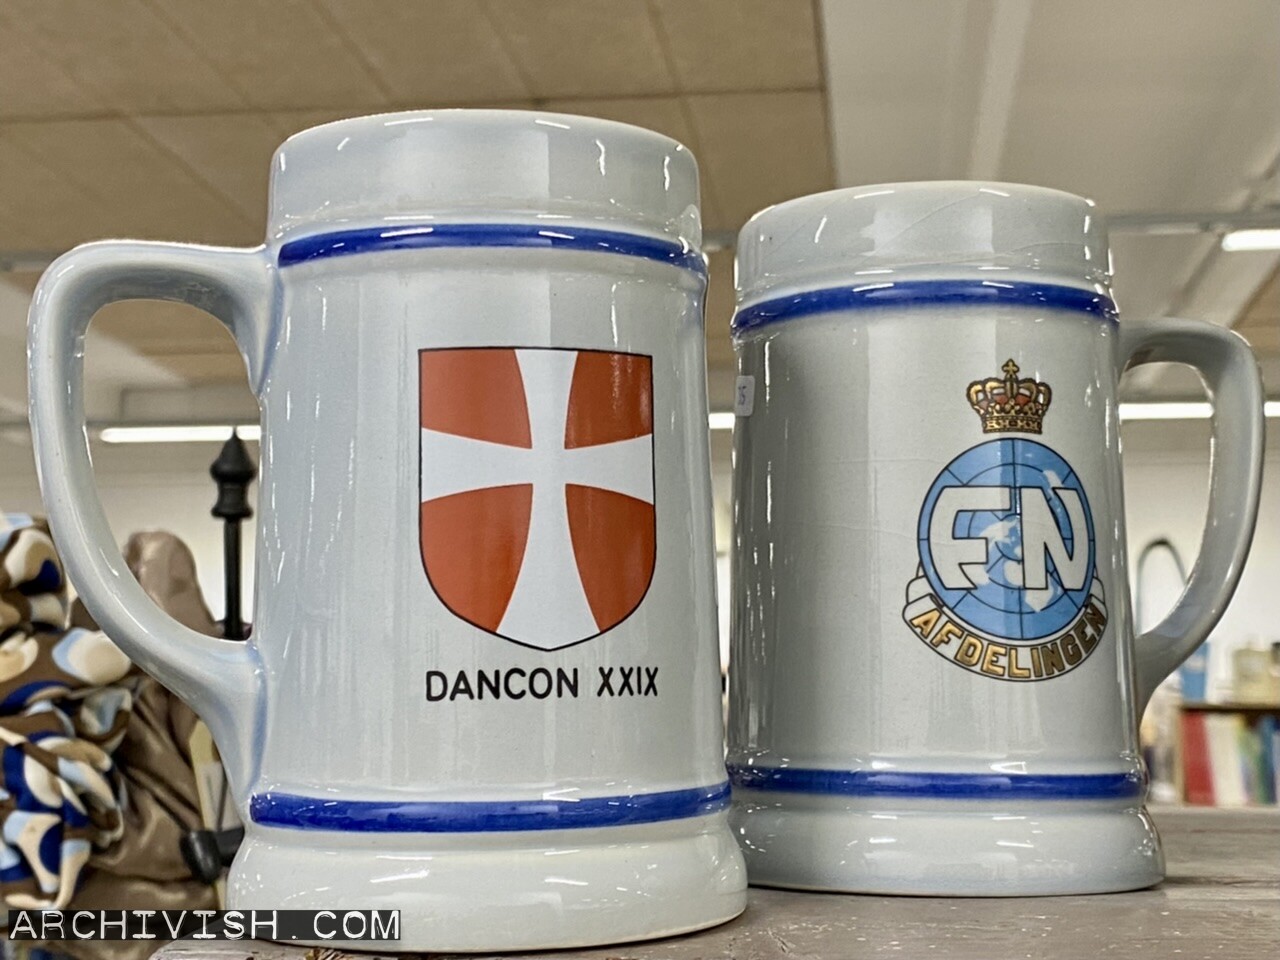 Søholm mugs with military insignia